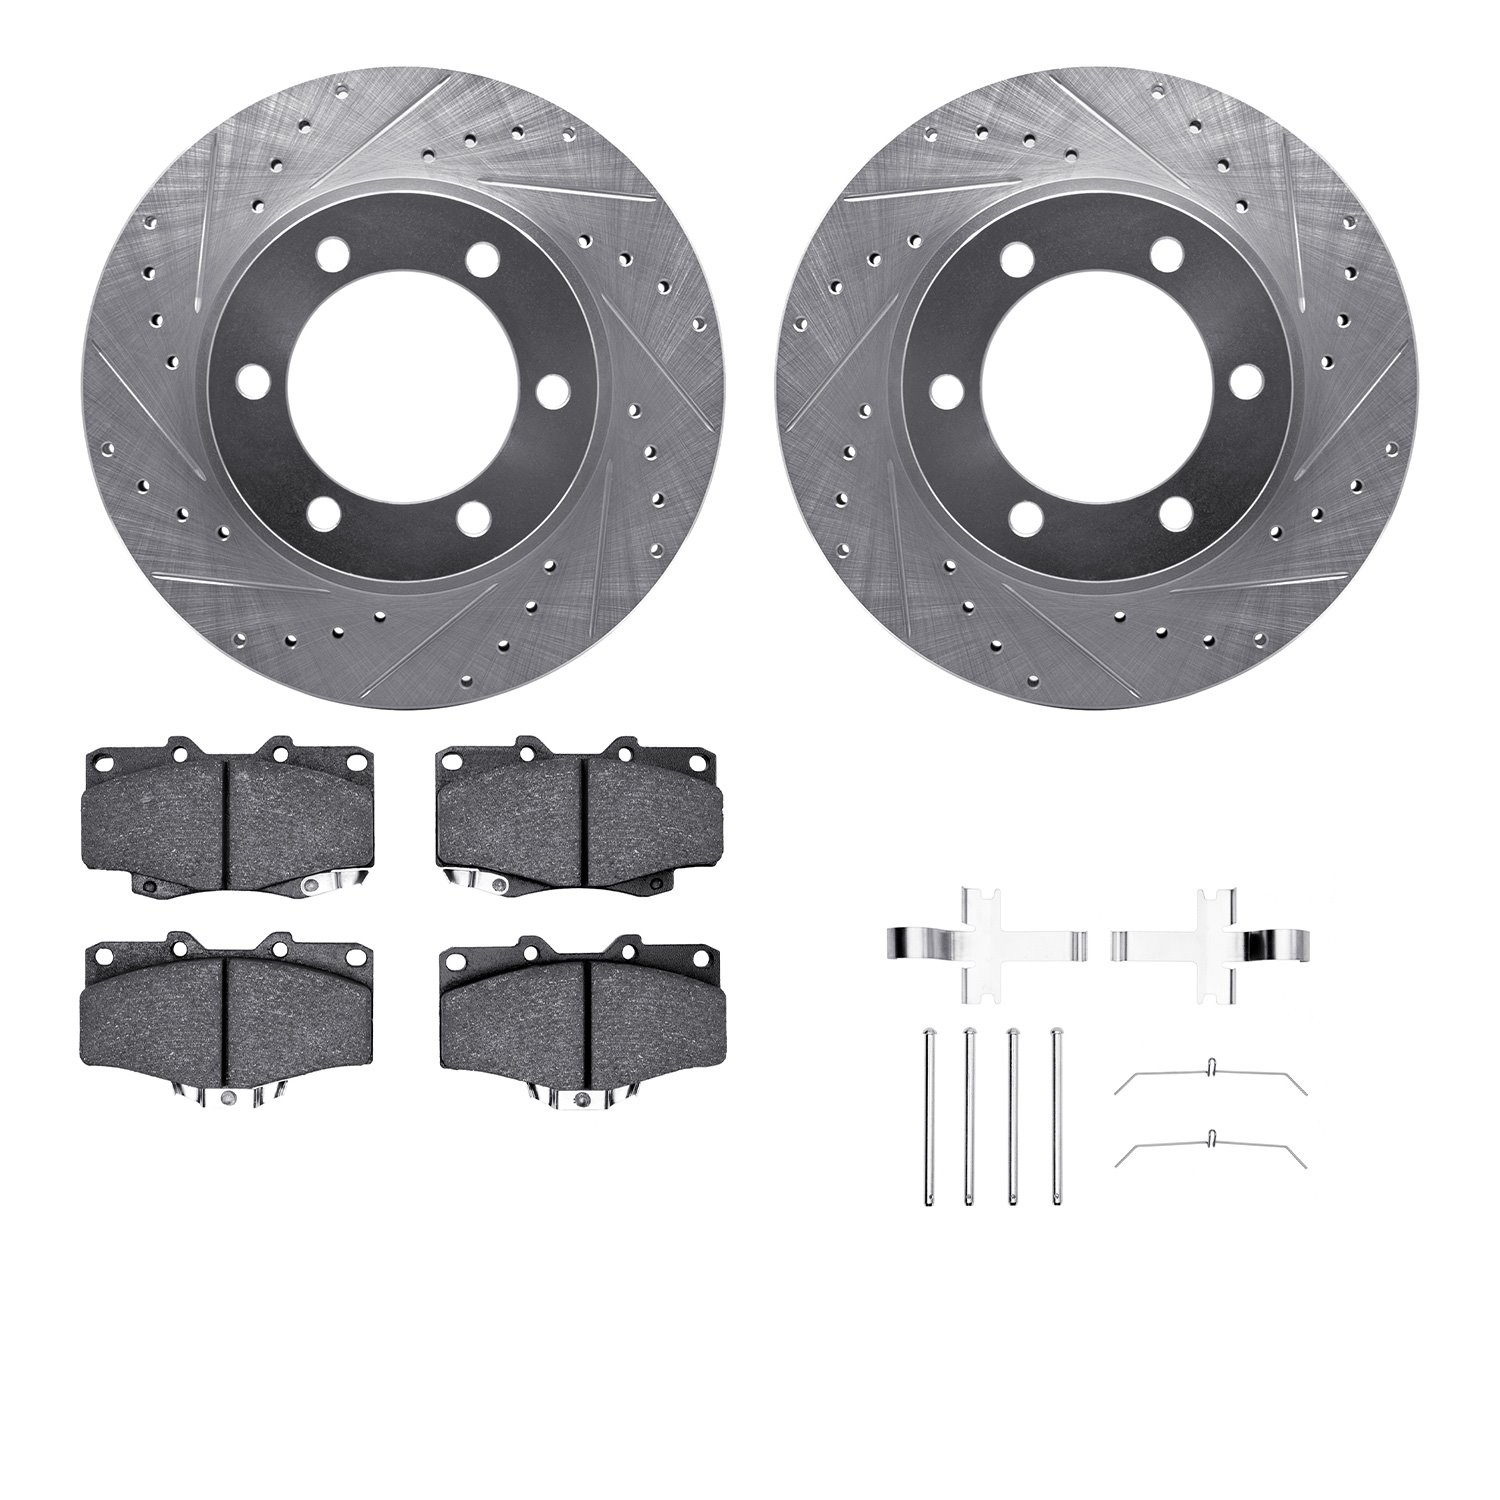 7412-76012 Drilled/Slotted Brake Rotors with Ultimate-Duty Brake Pads Kit & Hardware [Silver], 1995-2004 Lexus/Toyota/Scion, Pos